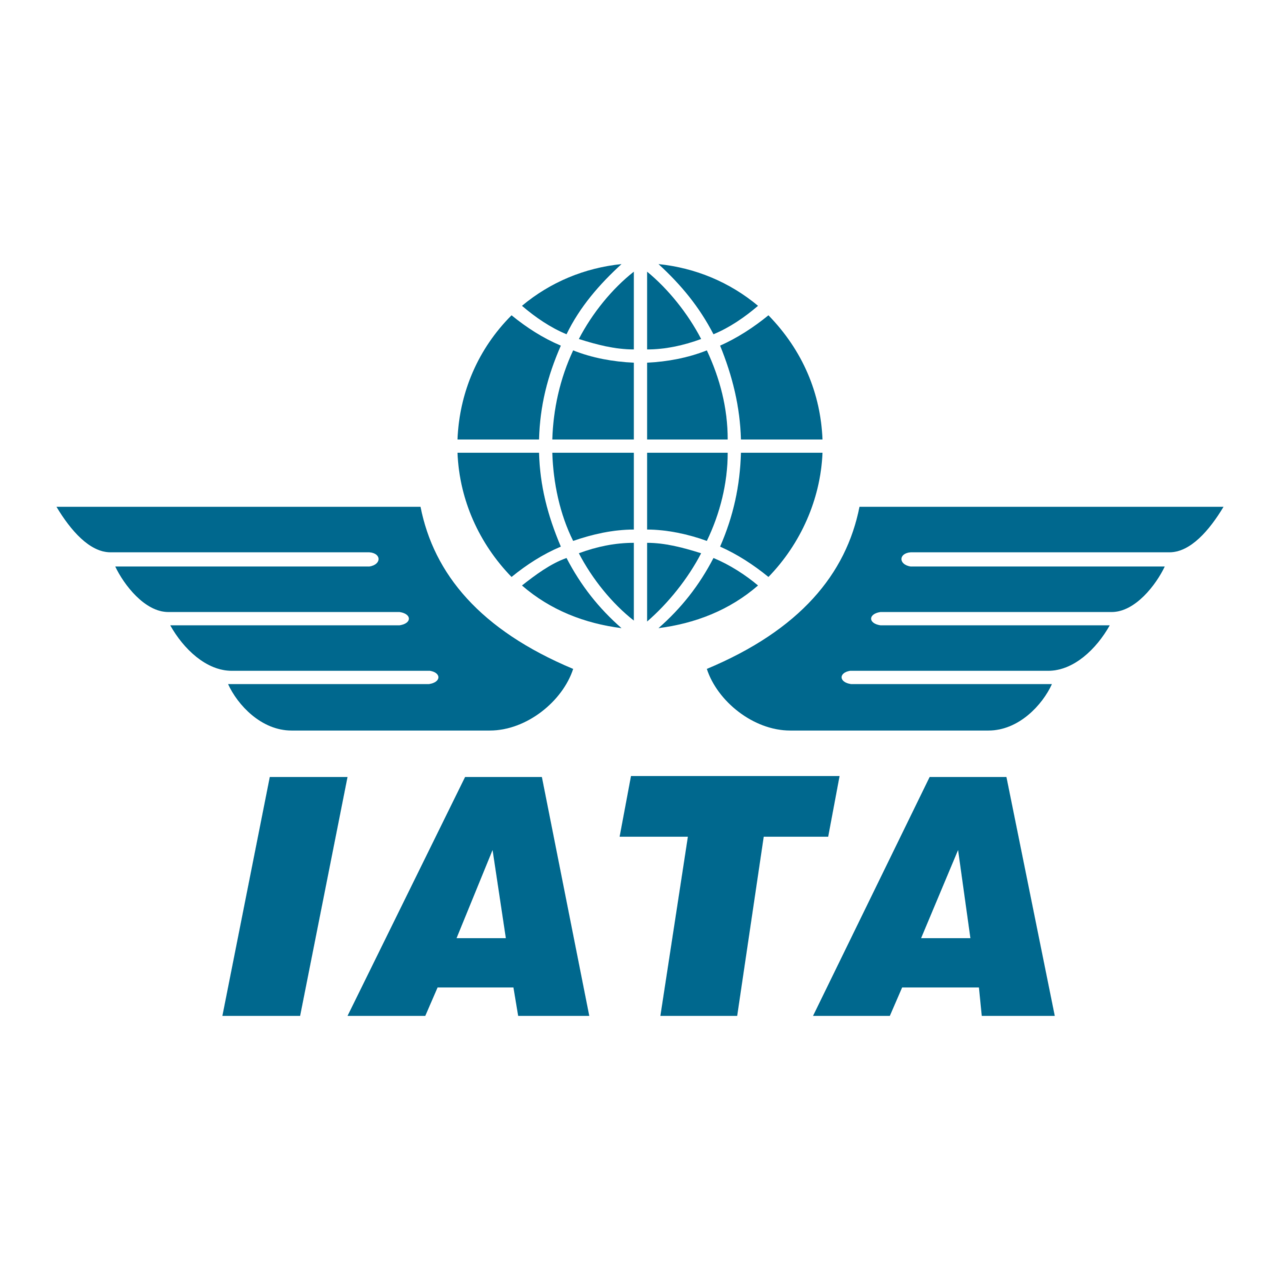 A blue logo for iata with a globe and wings